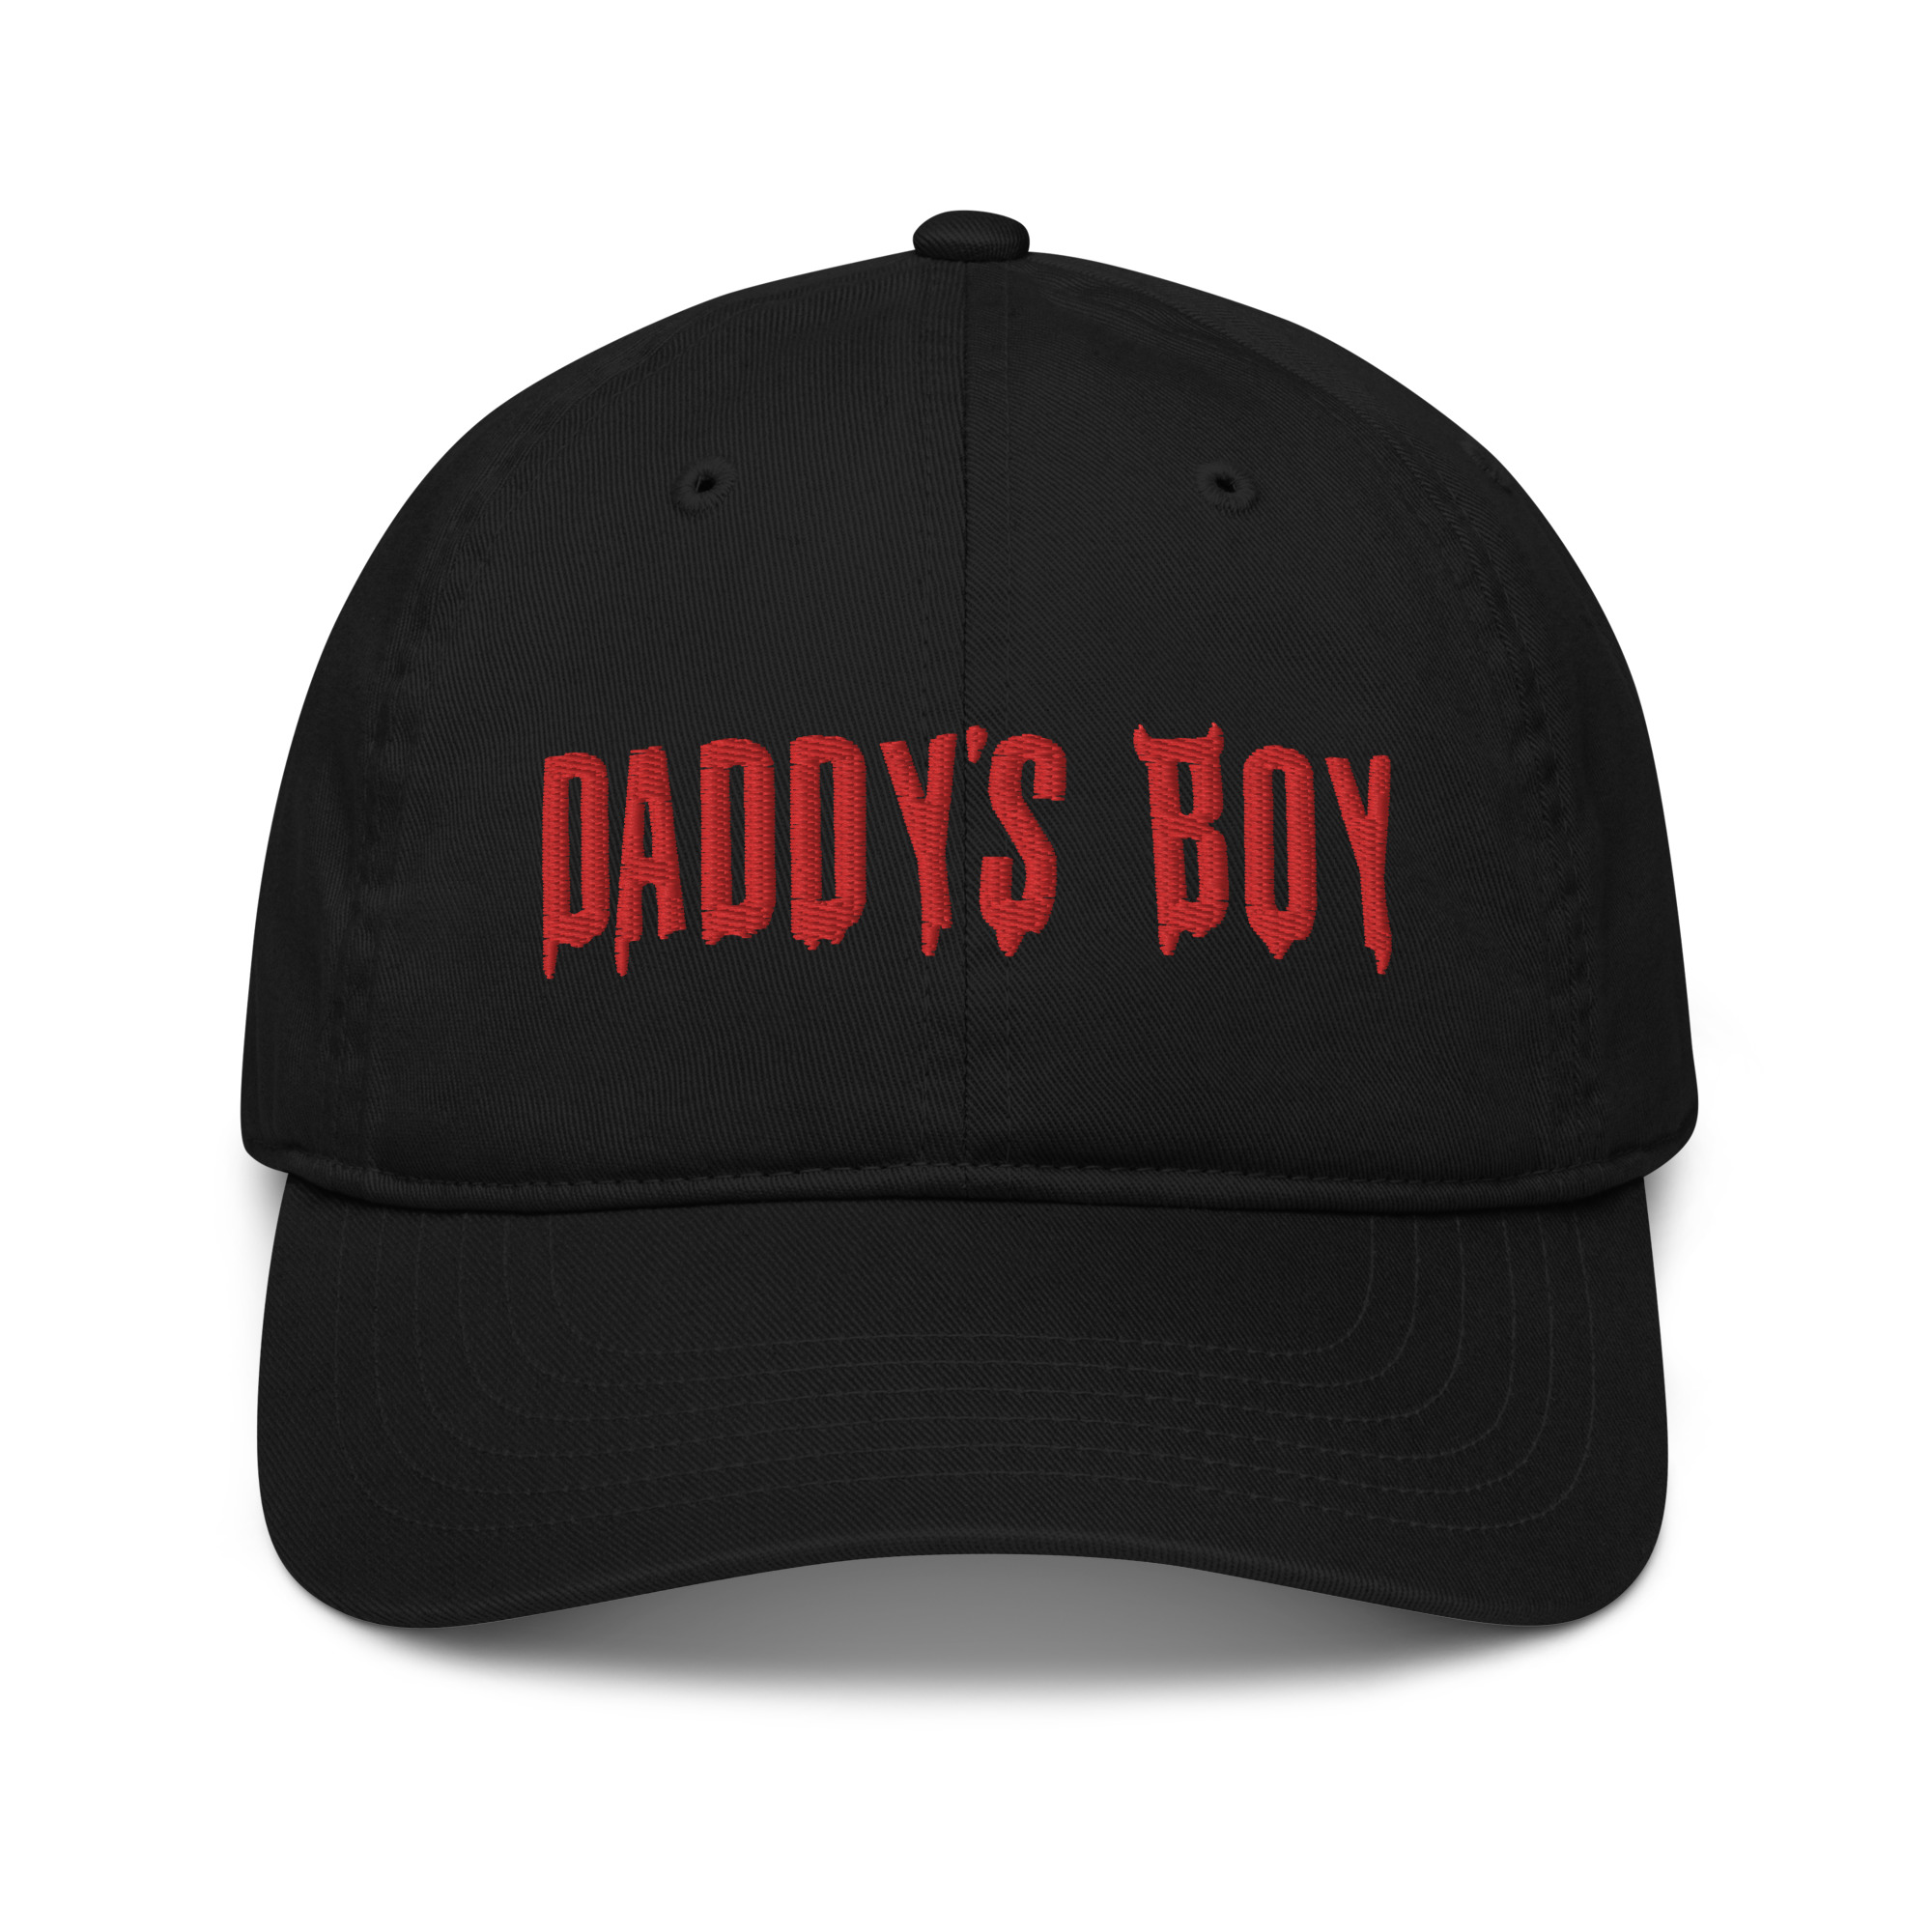 Featured image for “Daddy's Boy - Organic dad hat”